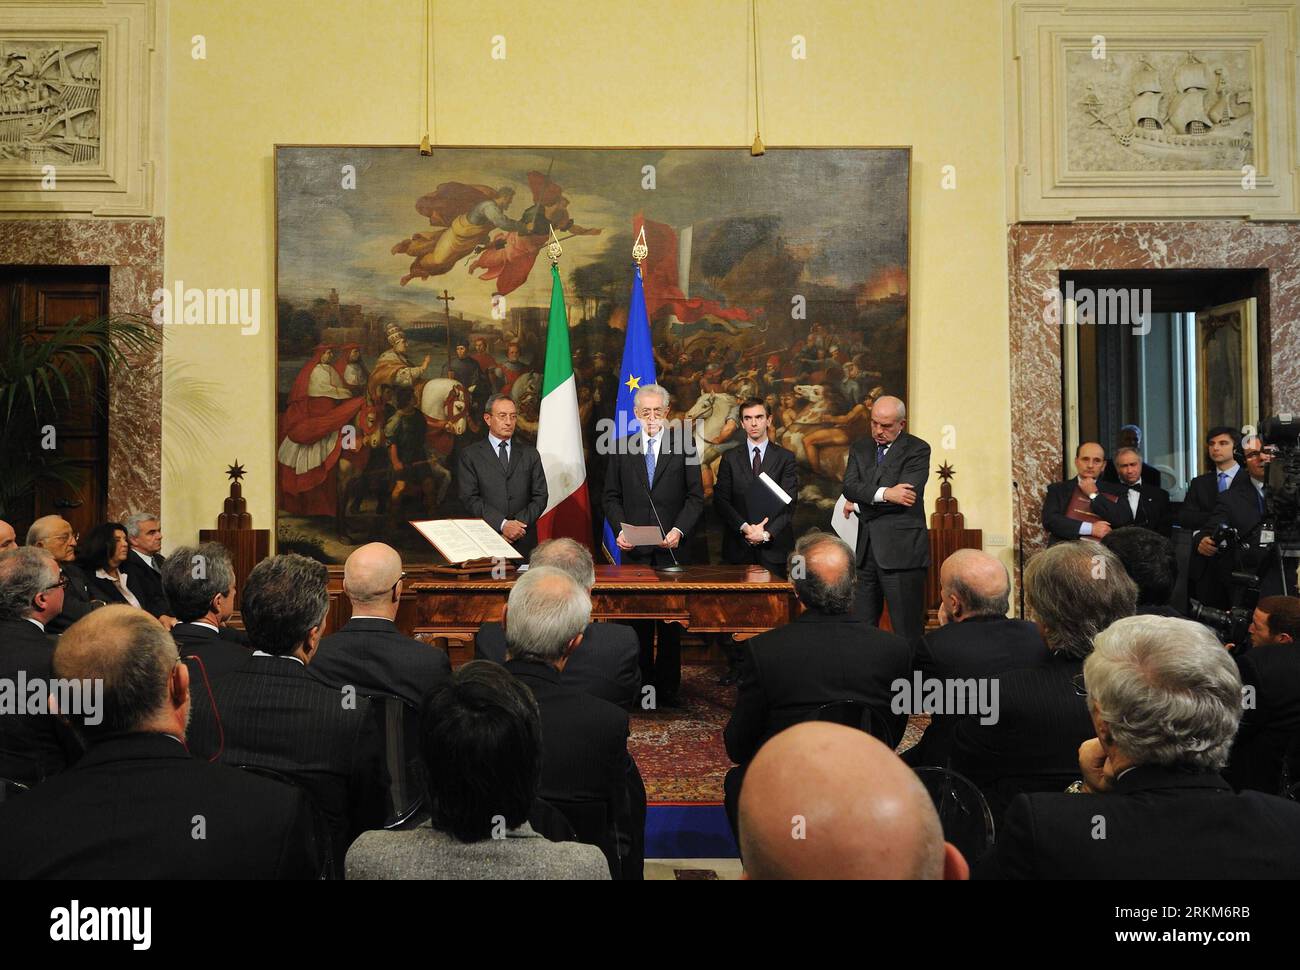 Bildnummer: 56533032  Datum: 29.11.2011  Copyright: imago/Xinhua (111129) -- ROME, Nov. 29, 2011 (Xinhua) -- Italian Prime Minister Mario Monti addresses vice ministers and undersecretaries of state at the Chigi Palace in Rome, Italy, Nov. 29, 2011. Monti appointed 3 vice ministers and 25 undersecretaries Tuesday, finishing the final touches of his technocracy government. (Xinhua/Wang Qingqin) ITALY-ROME-MONTI-GOVERNMENT PUBLICATIONxNOTxINxCHN People Politik premiumd xns x0x 2011 quer      56533032 Date 29 11 2011 Copyright Imago XINHUA  Rome Nov 29 2011 XINHUA Italian Prime Ministers Mario Mo Stock Photo